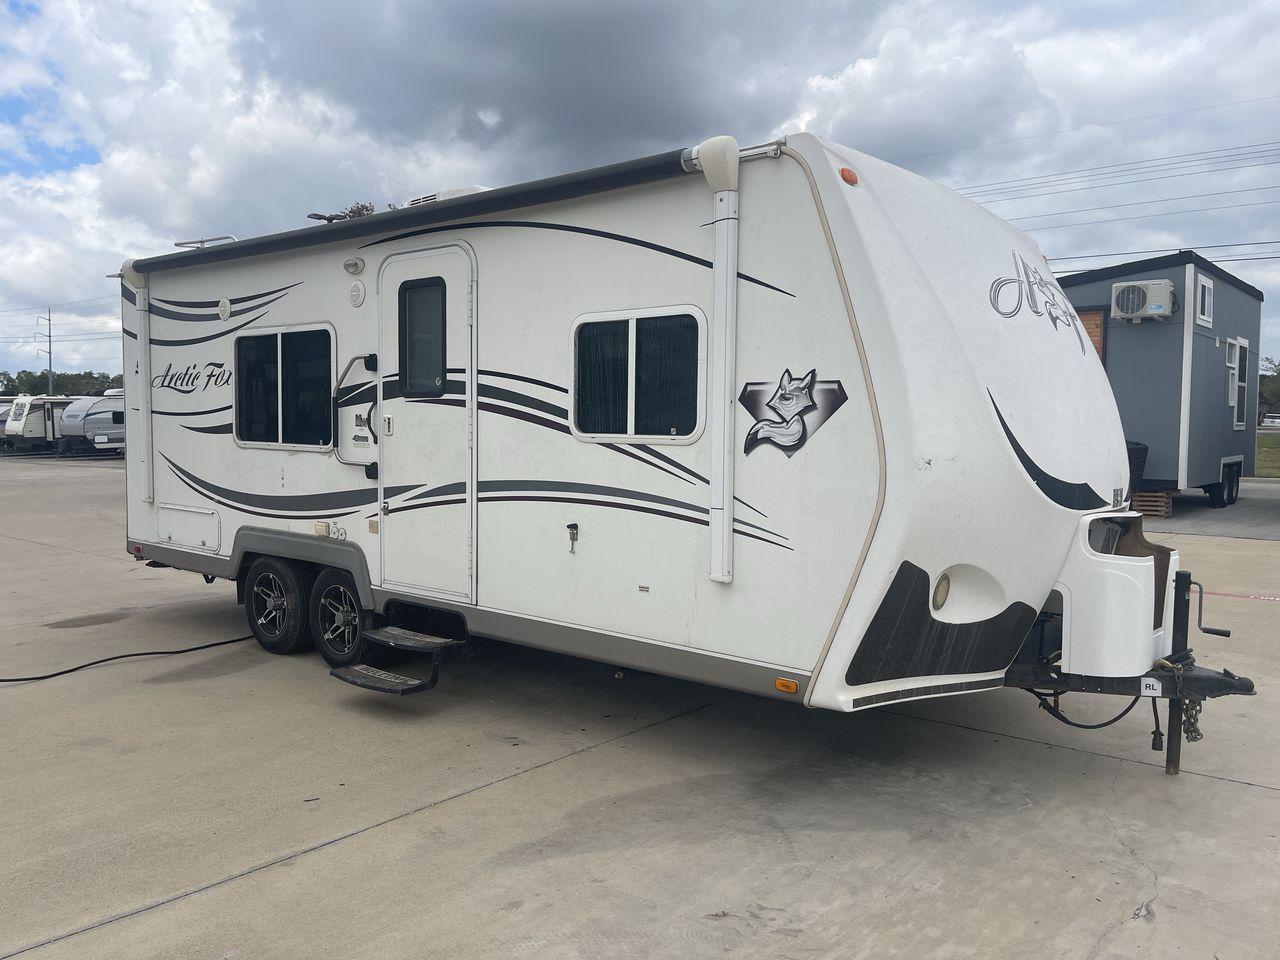 2012 WHITE NORTHWOOD ARCTIC FOX 22H (4N11H2223C0) , Length: 23 ft. | Dry Weight: 4,880 lbs. | Slides: 0 transmission, located at 4319 N Main Street, Cleburne, TX, 76033, (817) 221-0660, 32.435829, -97.384178 - With the 2012 Northwood Arctic Fox 22H travel trailer, set out on outdoor adventures. This tough and fully functional RV is made to withstand a range of conditions and offer you comfort and convenience while traveling. The measurements of this unit are 23 ft in length by 8 ft in width. It has a d - Photo #20